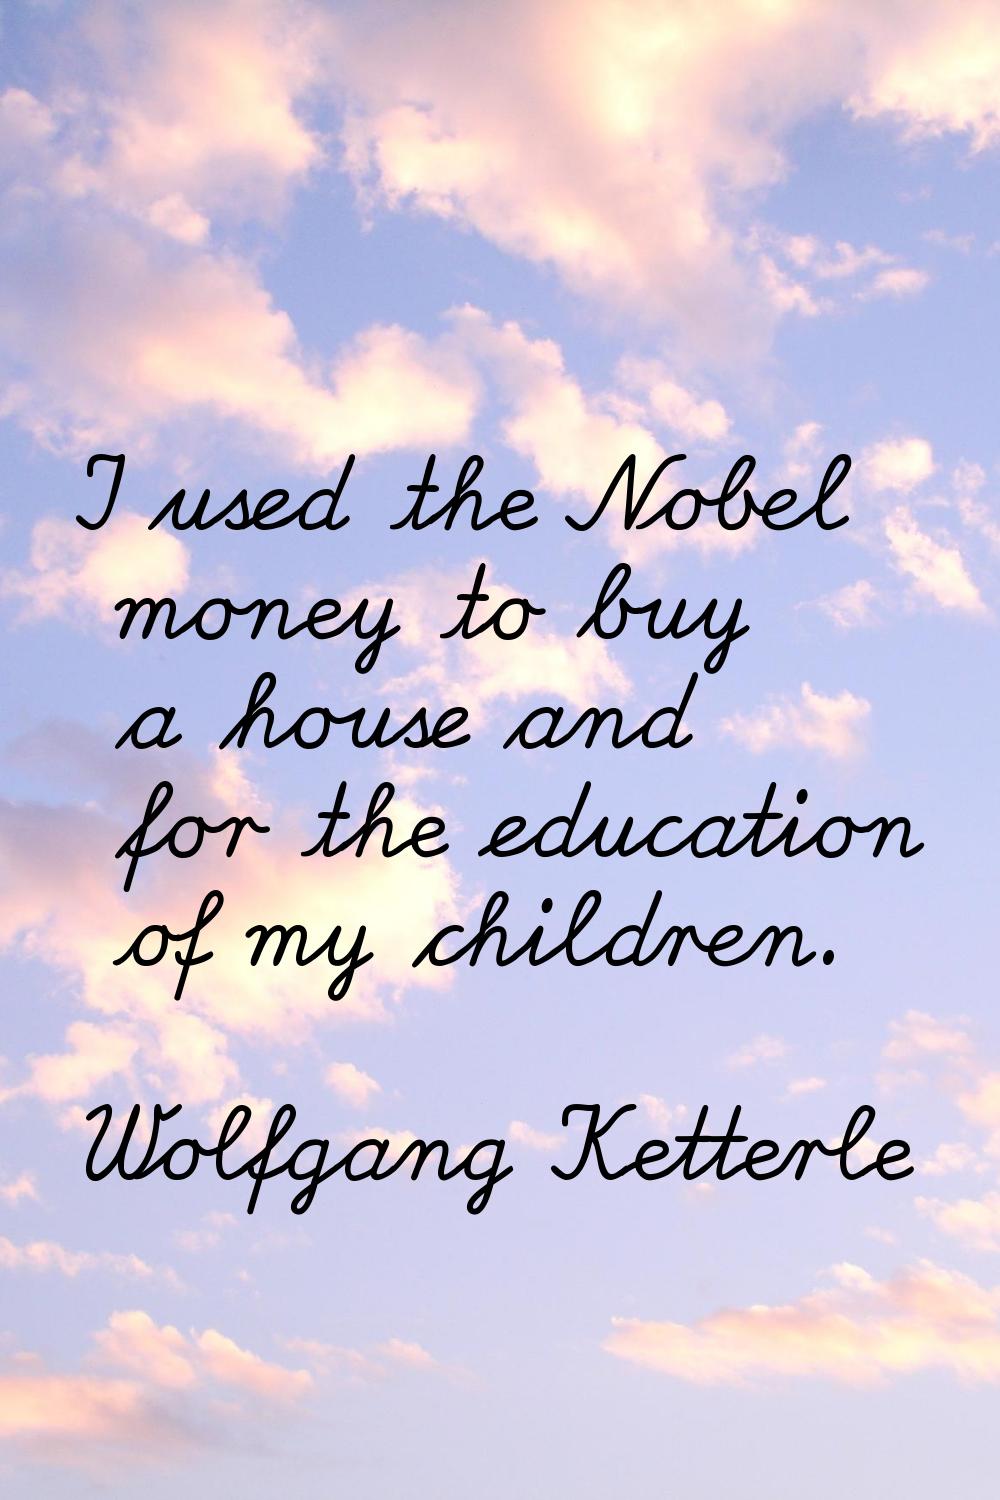 I used the Nobel money to buy a house and for the education of my children.